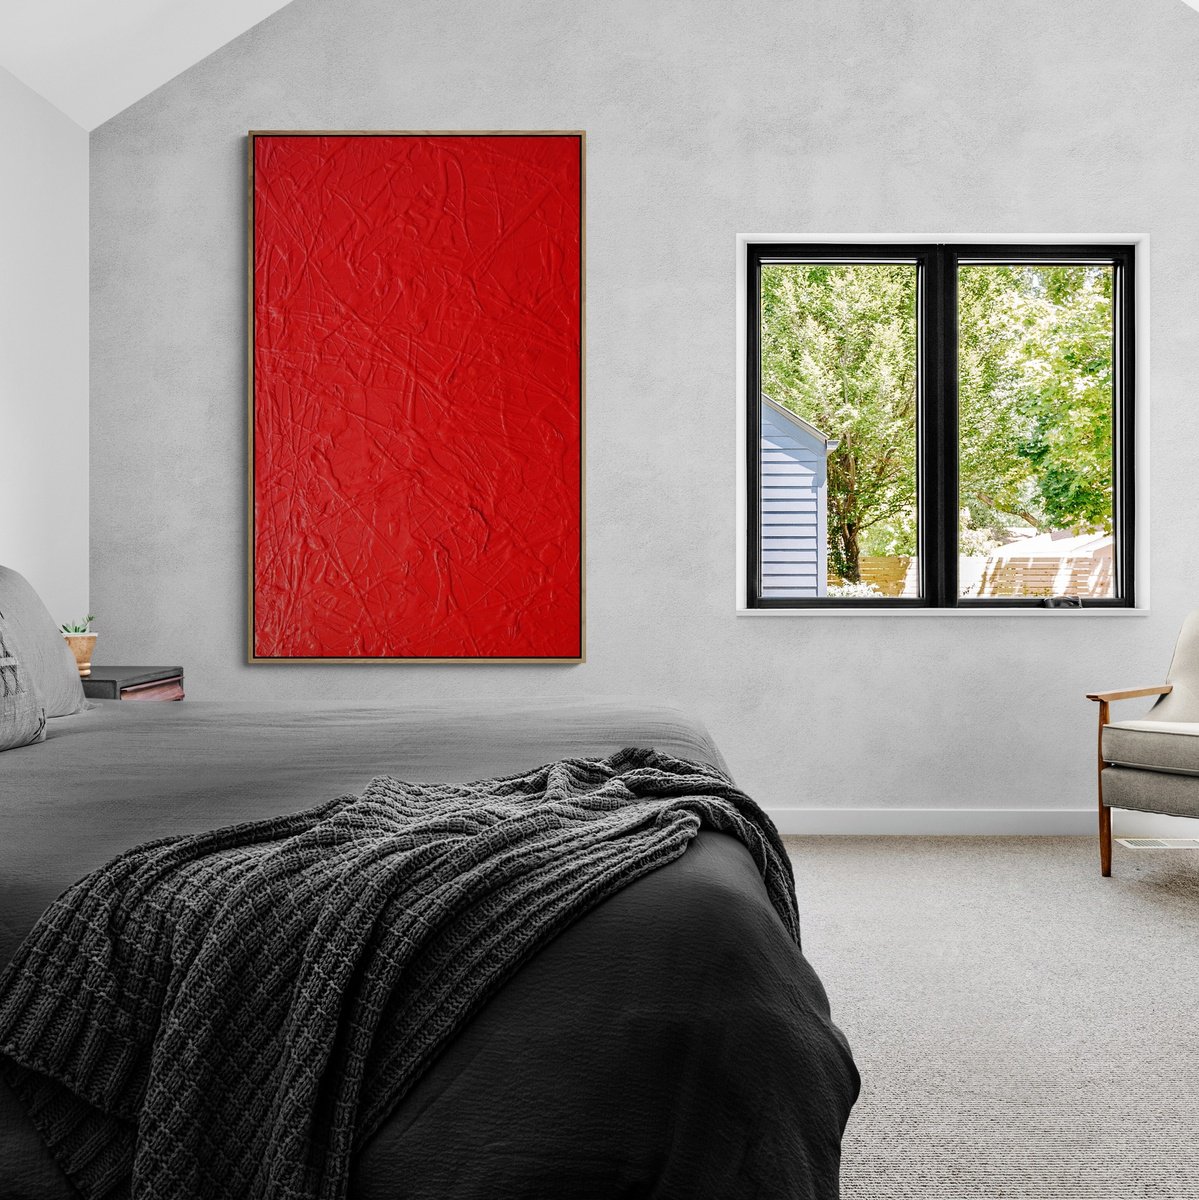 Red Devil 160cm x 100cm Textured Abstract Art by Franko